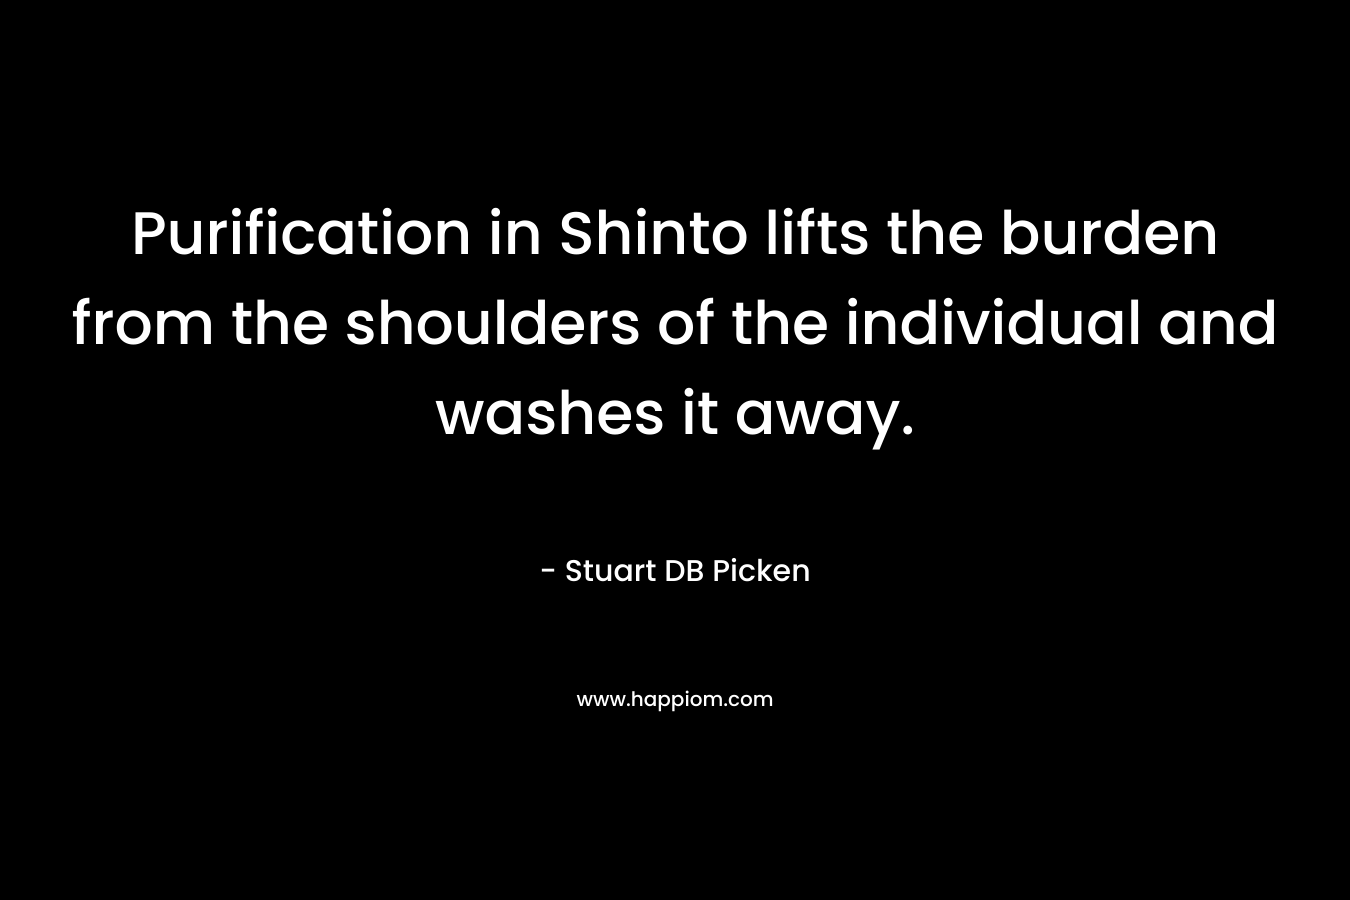 Purification in Shinto lifts the burden from the shoulders of the individual and washes it away. – Stuart DB Picken